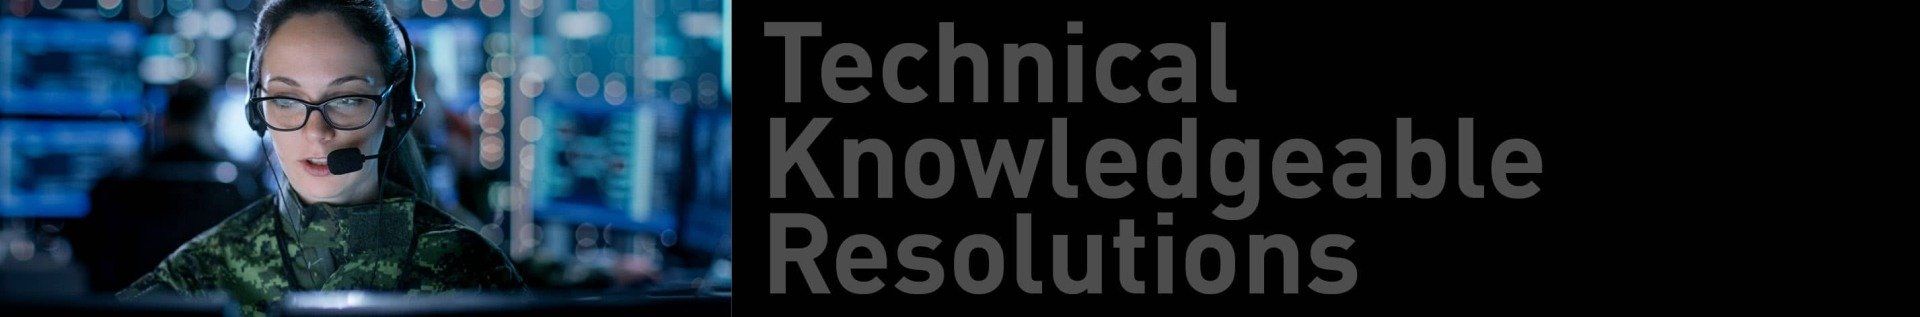 Technical Knowledgeable Resolutions banner